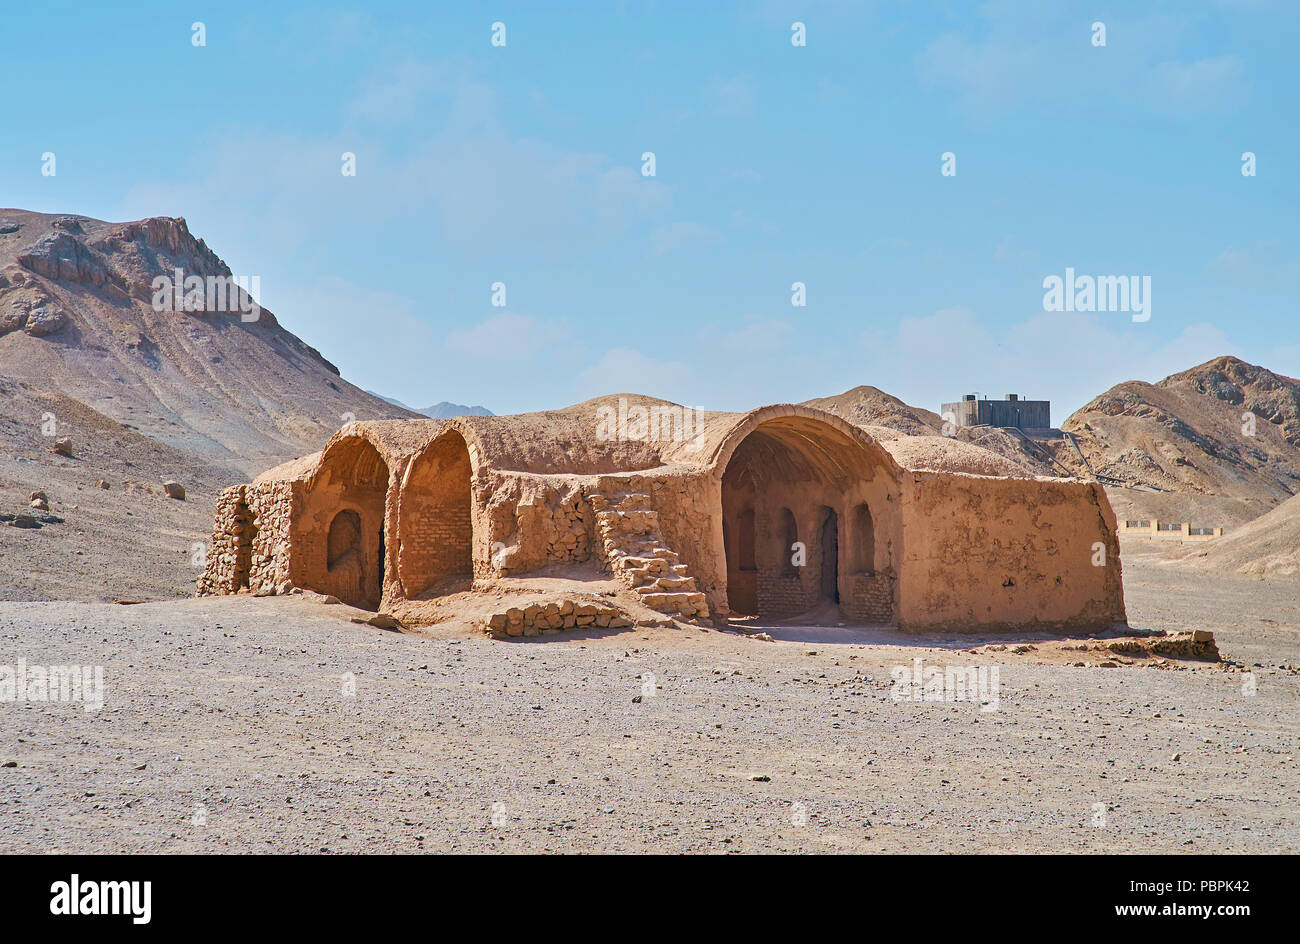 The Zoroastrian ceremonial Khaiele building is located among the rocky deserted hills in Towers of Silence archaeological site, Yazd, Iran. Stock Photo